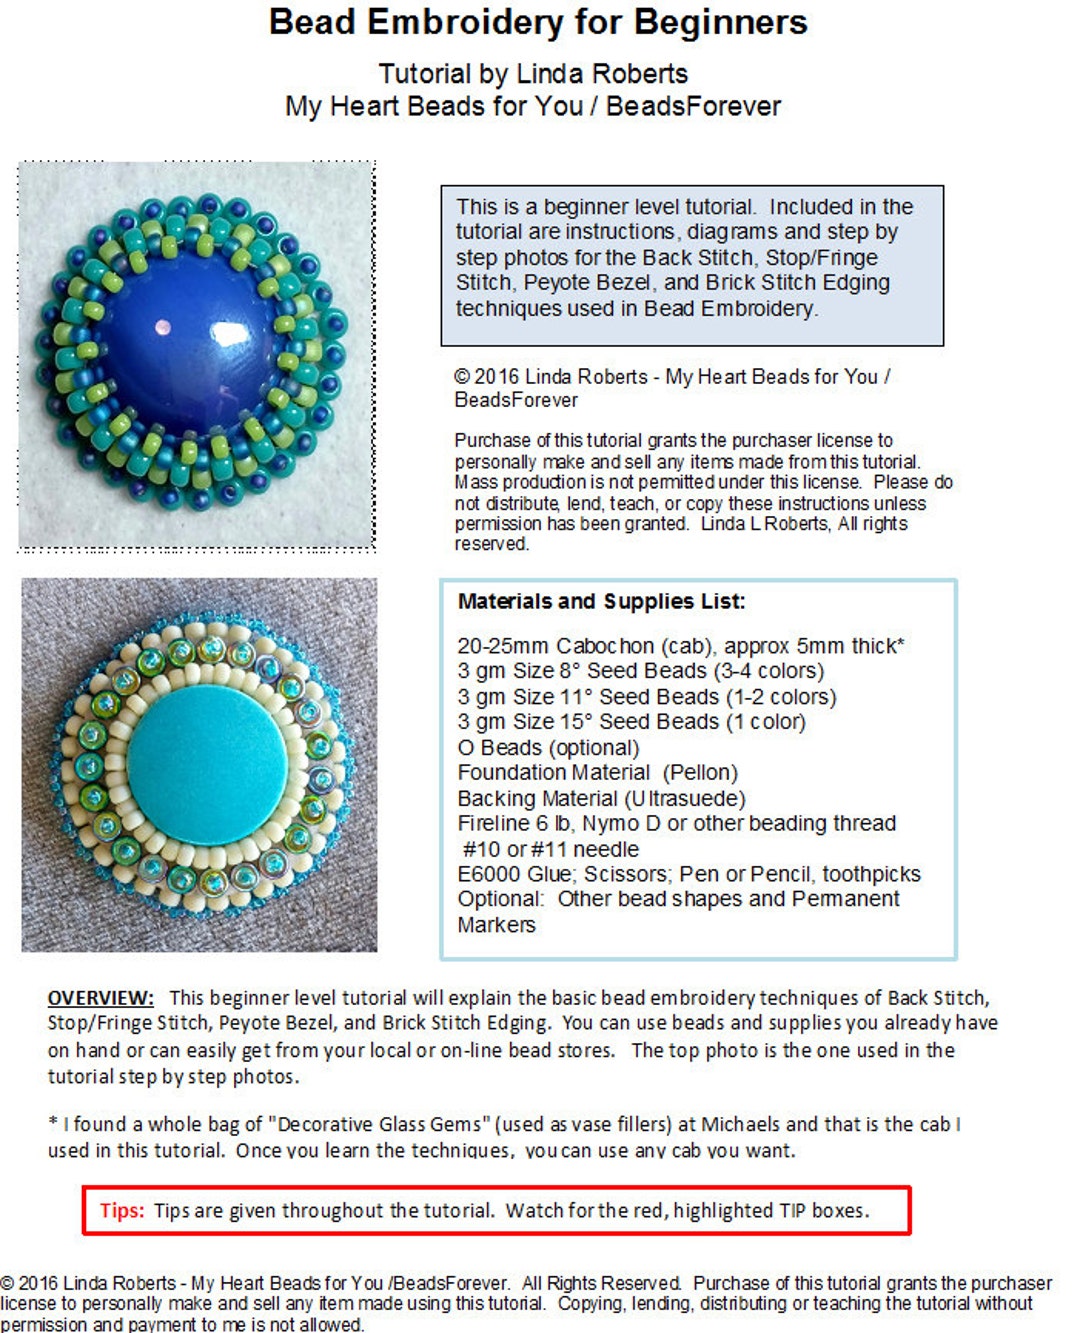 Top Recommended Bead Embroidery Supplies